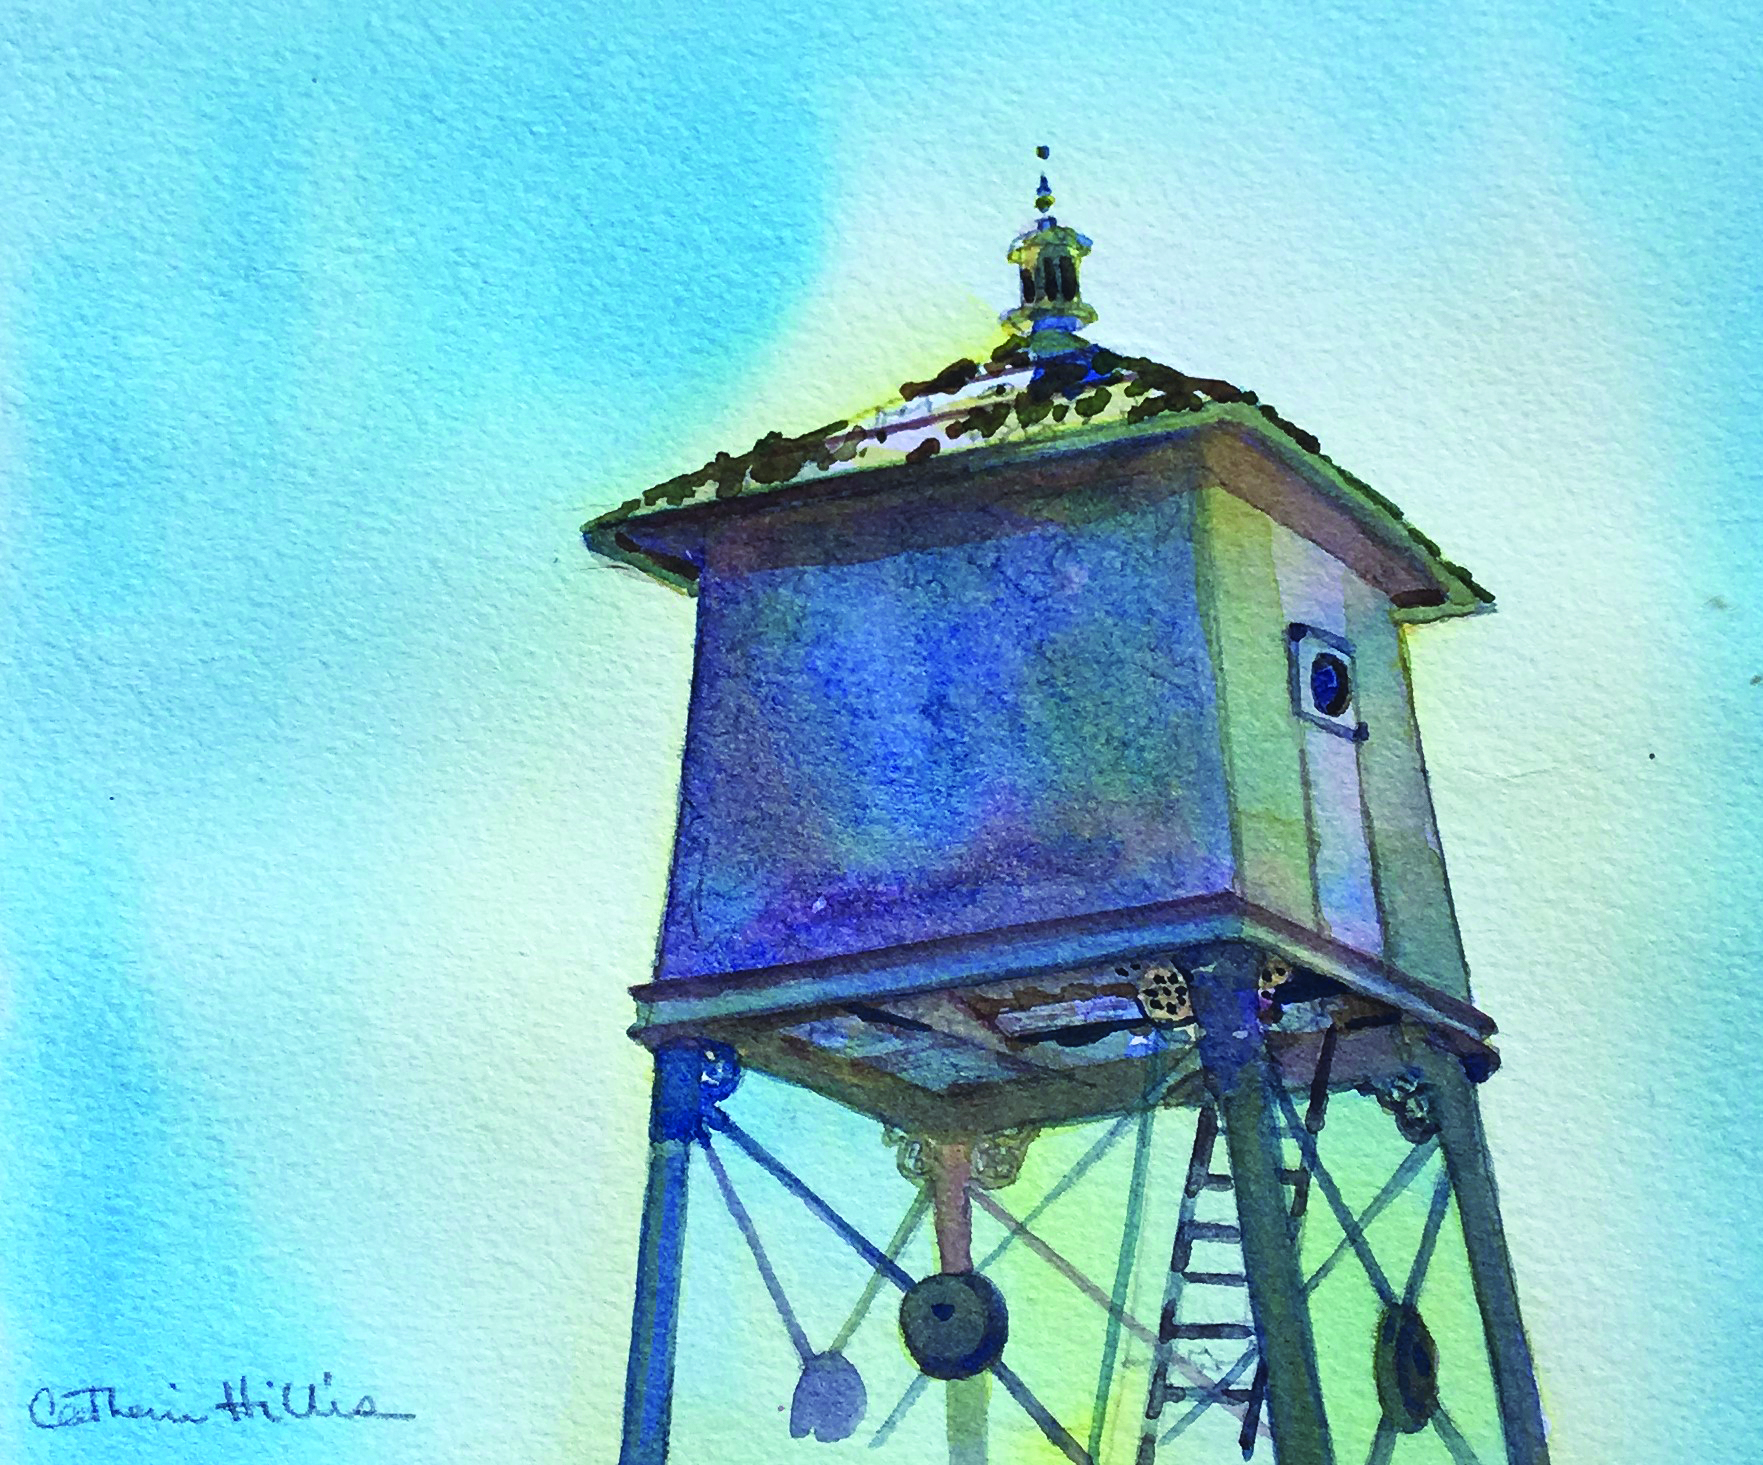 Catherine Hillis (b. 1953), "Sapelo Island Range Front Light," [Sapelo Island, Georgia], watercolor on paper, 14 x 11 in., collection of the artist